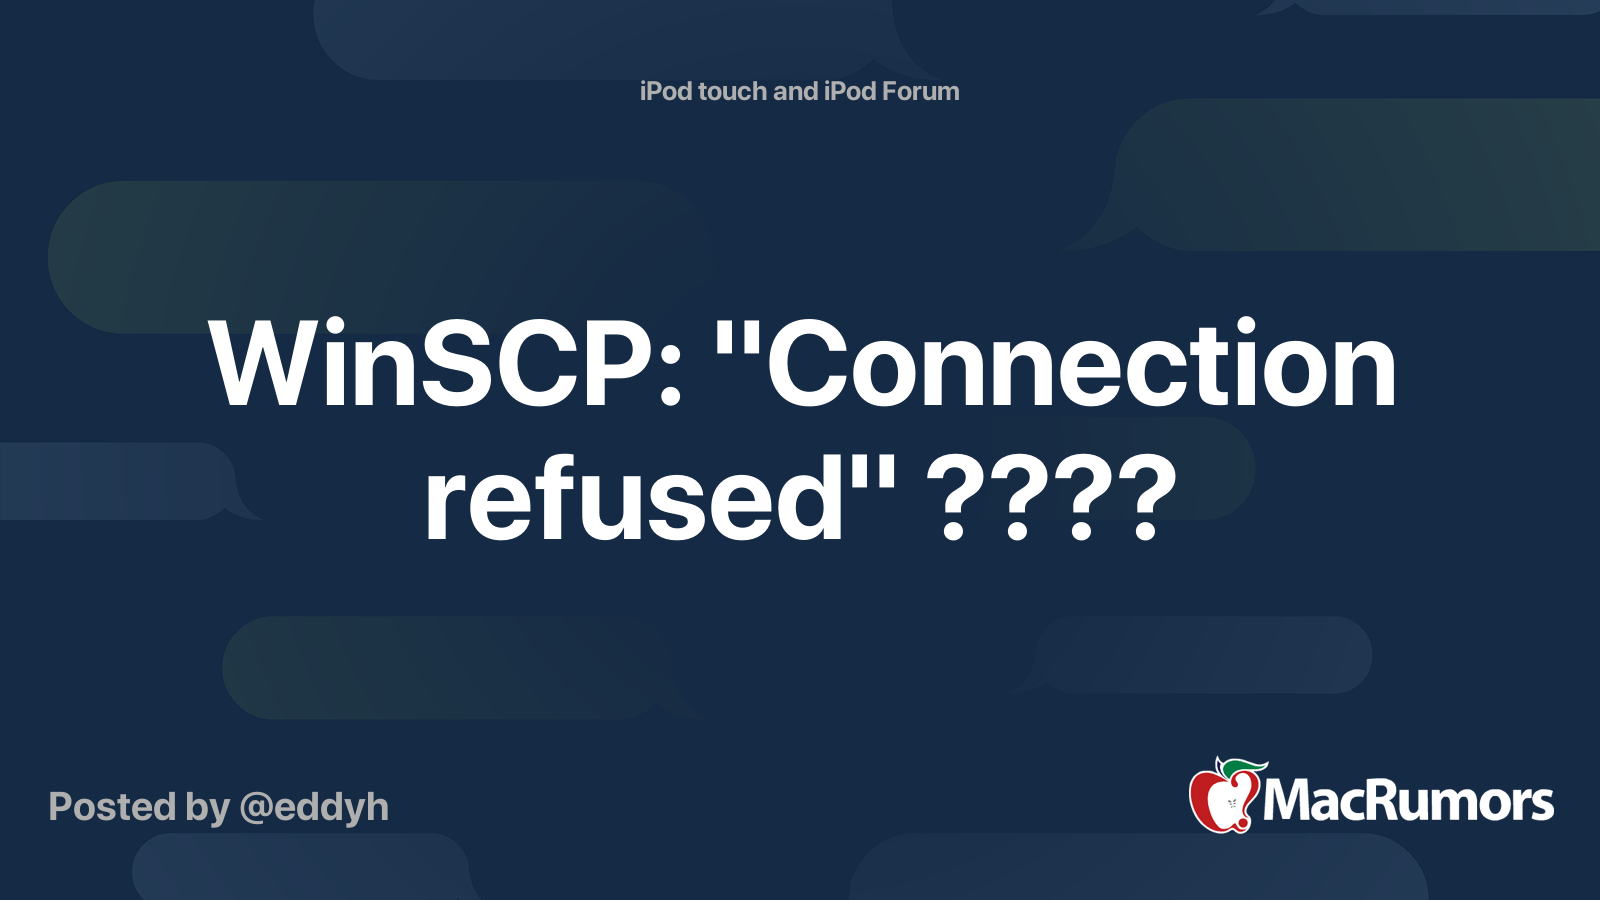 winscp refused connection ipod